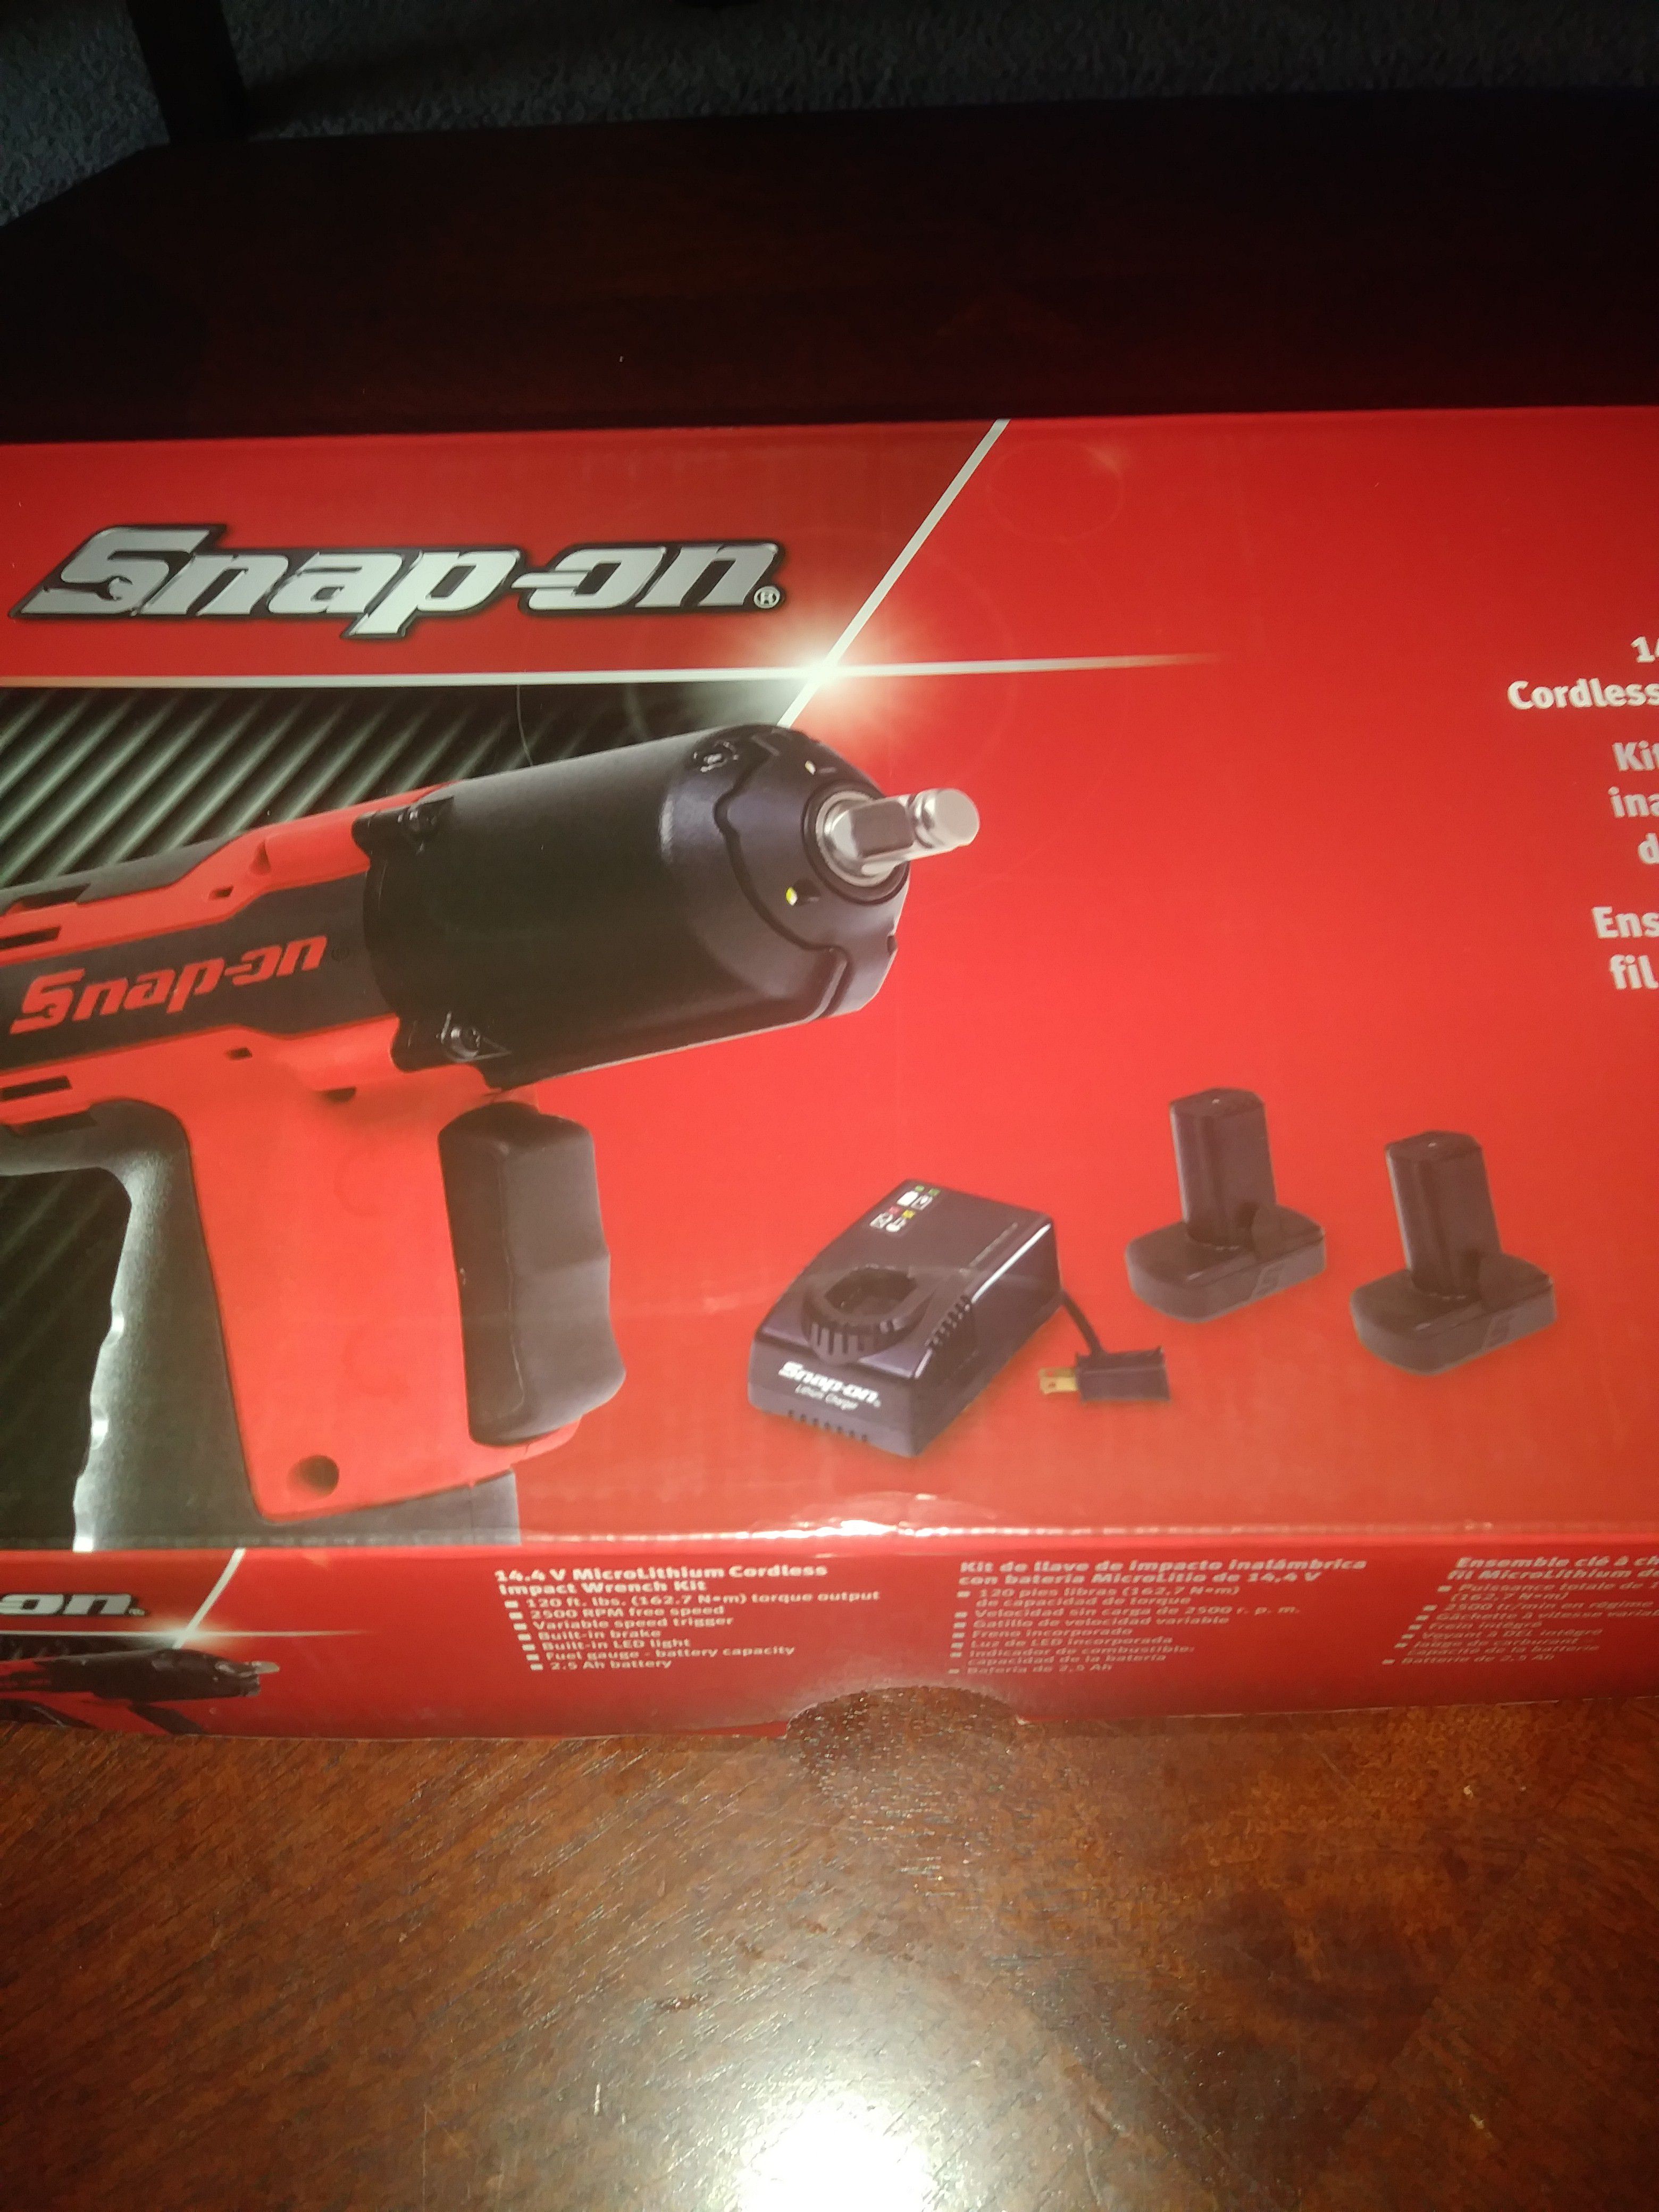 Snap on 14.4v microlithium cordless impact wrench kit brand new